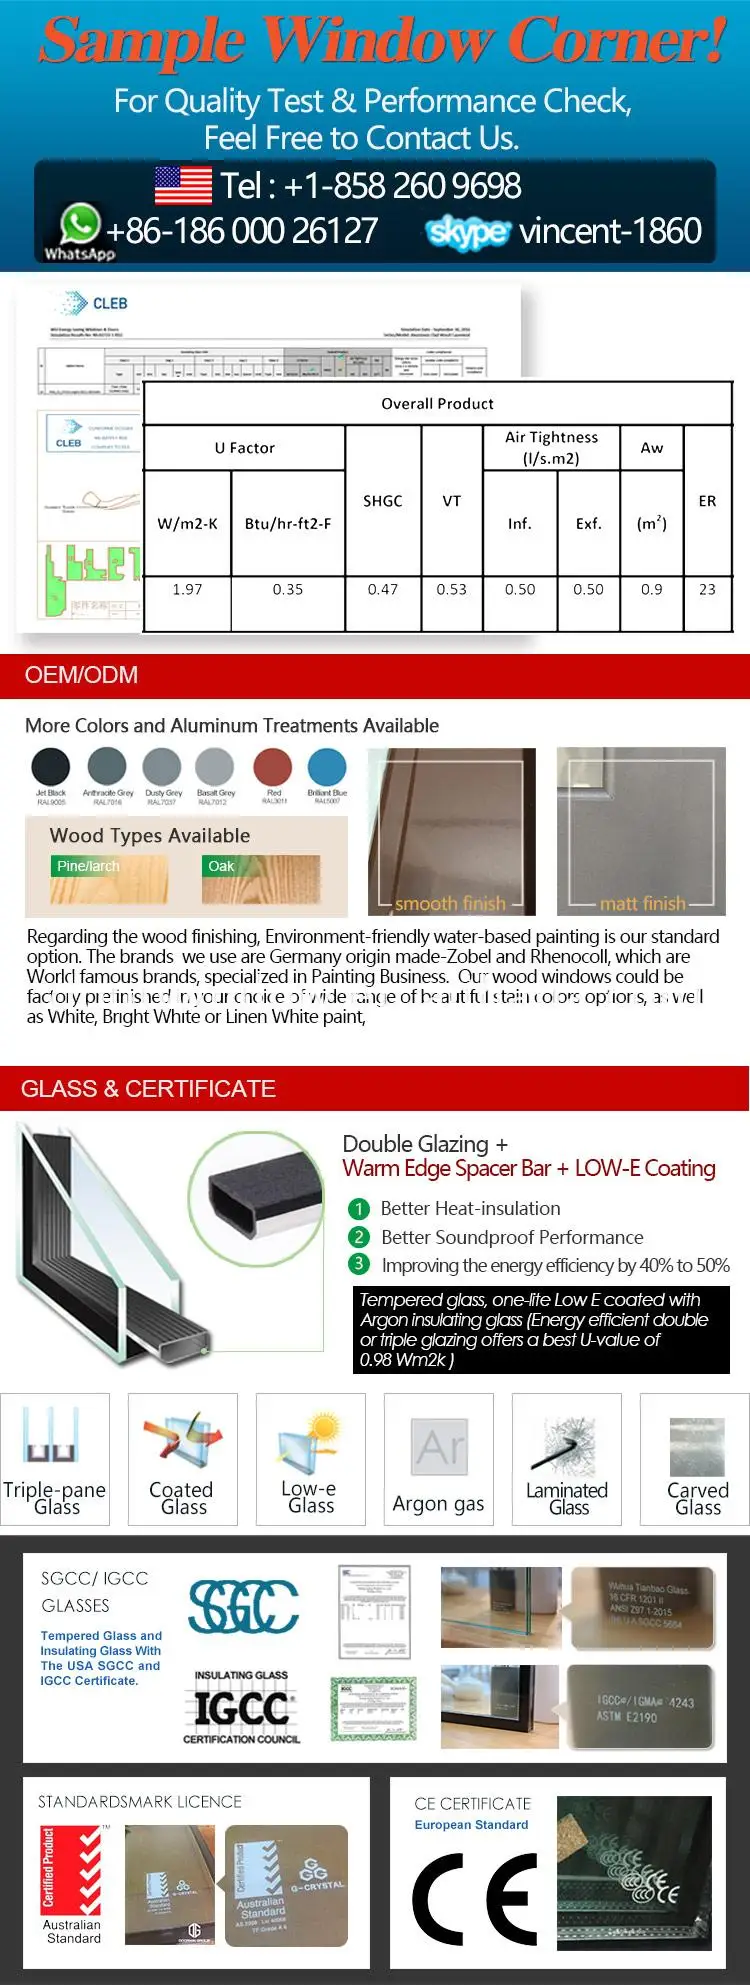 Sound proof partition wall small window awning sliding windows